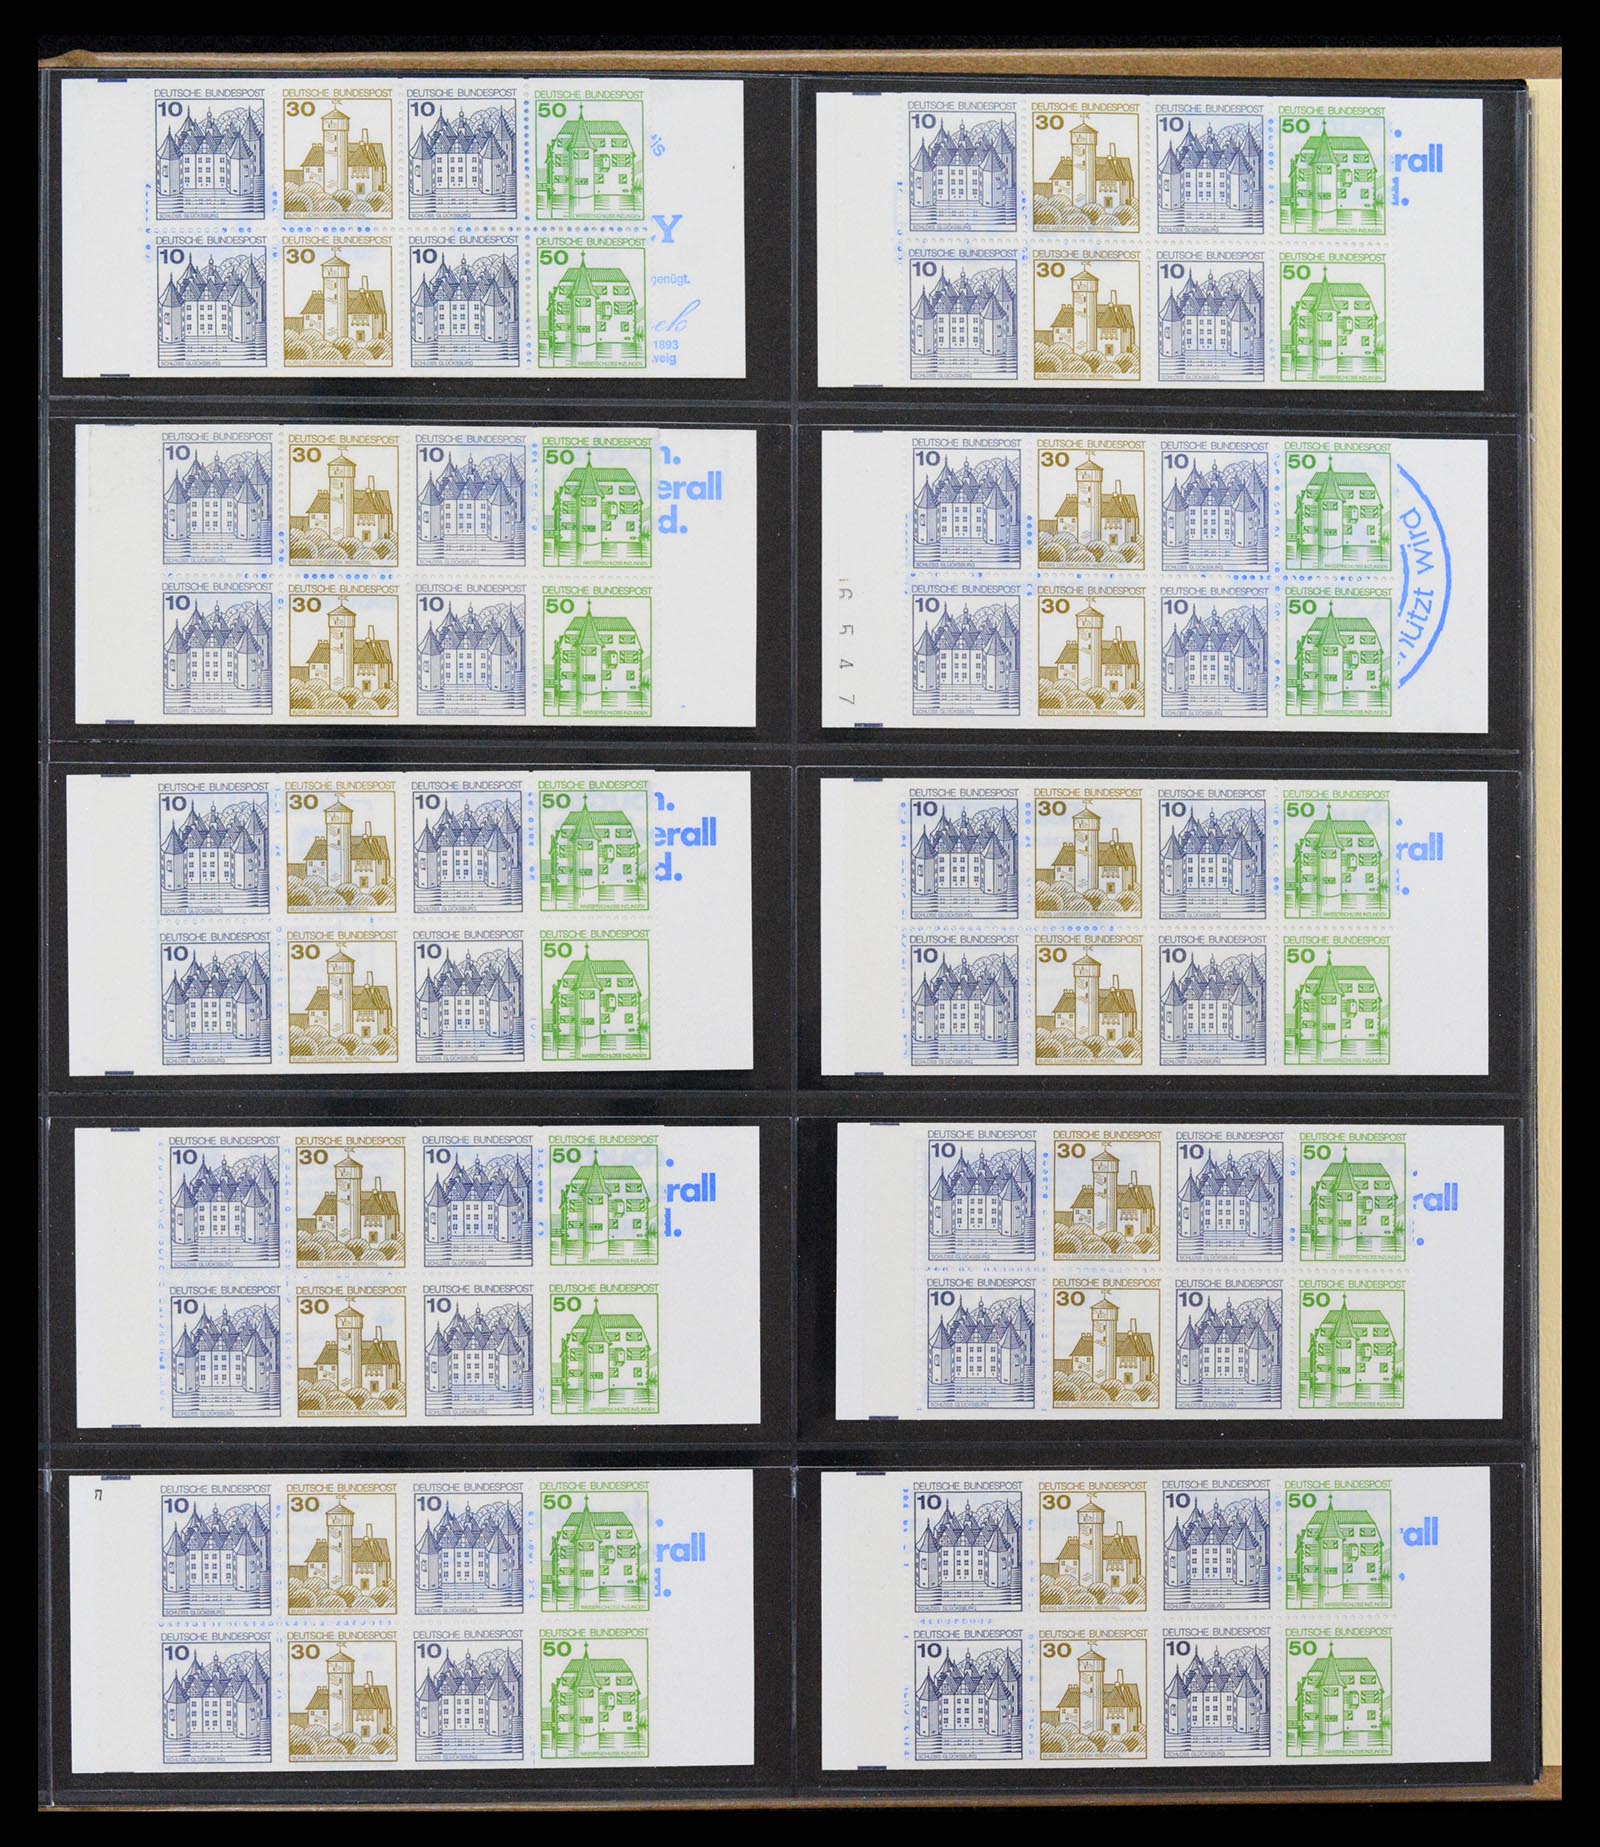 37365 038 - Stamp collection 37365 Bundespost stamp booklets 1951-2001.